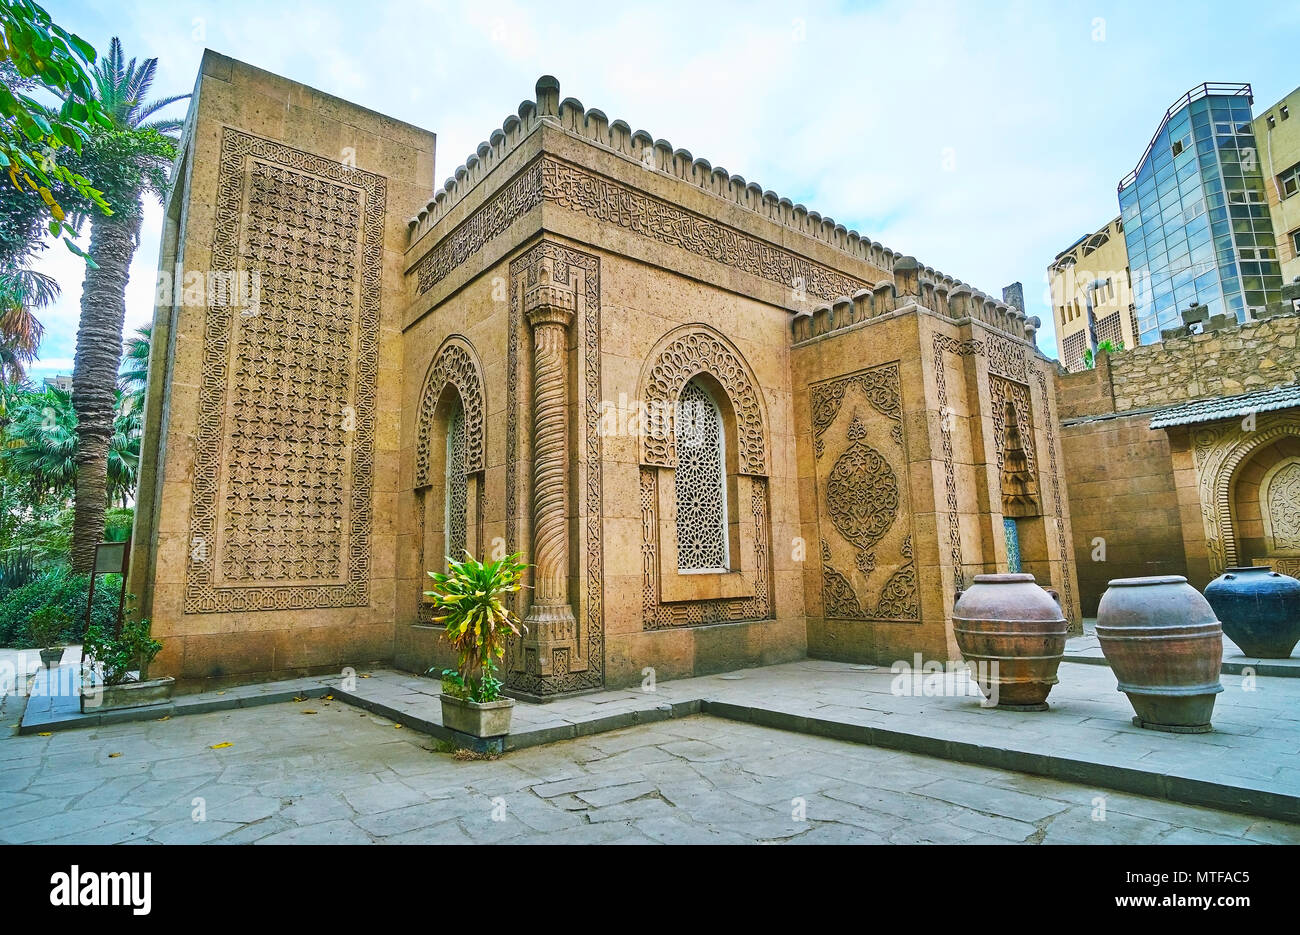 The side wall of a mosque of Manial palace complex with fine carved patterns, inspired by Moroccan architecture, Cairo, Egypt. Stock Photo